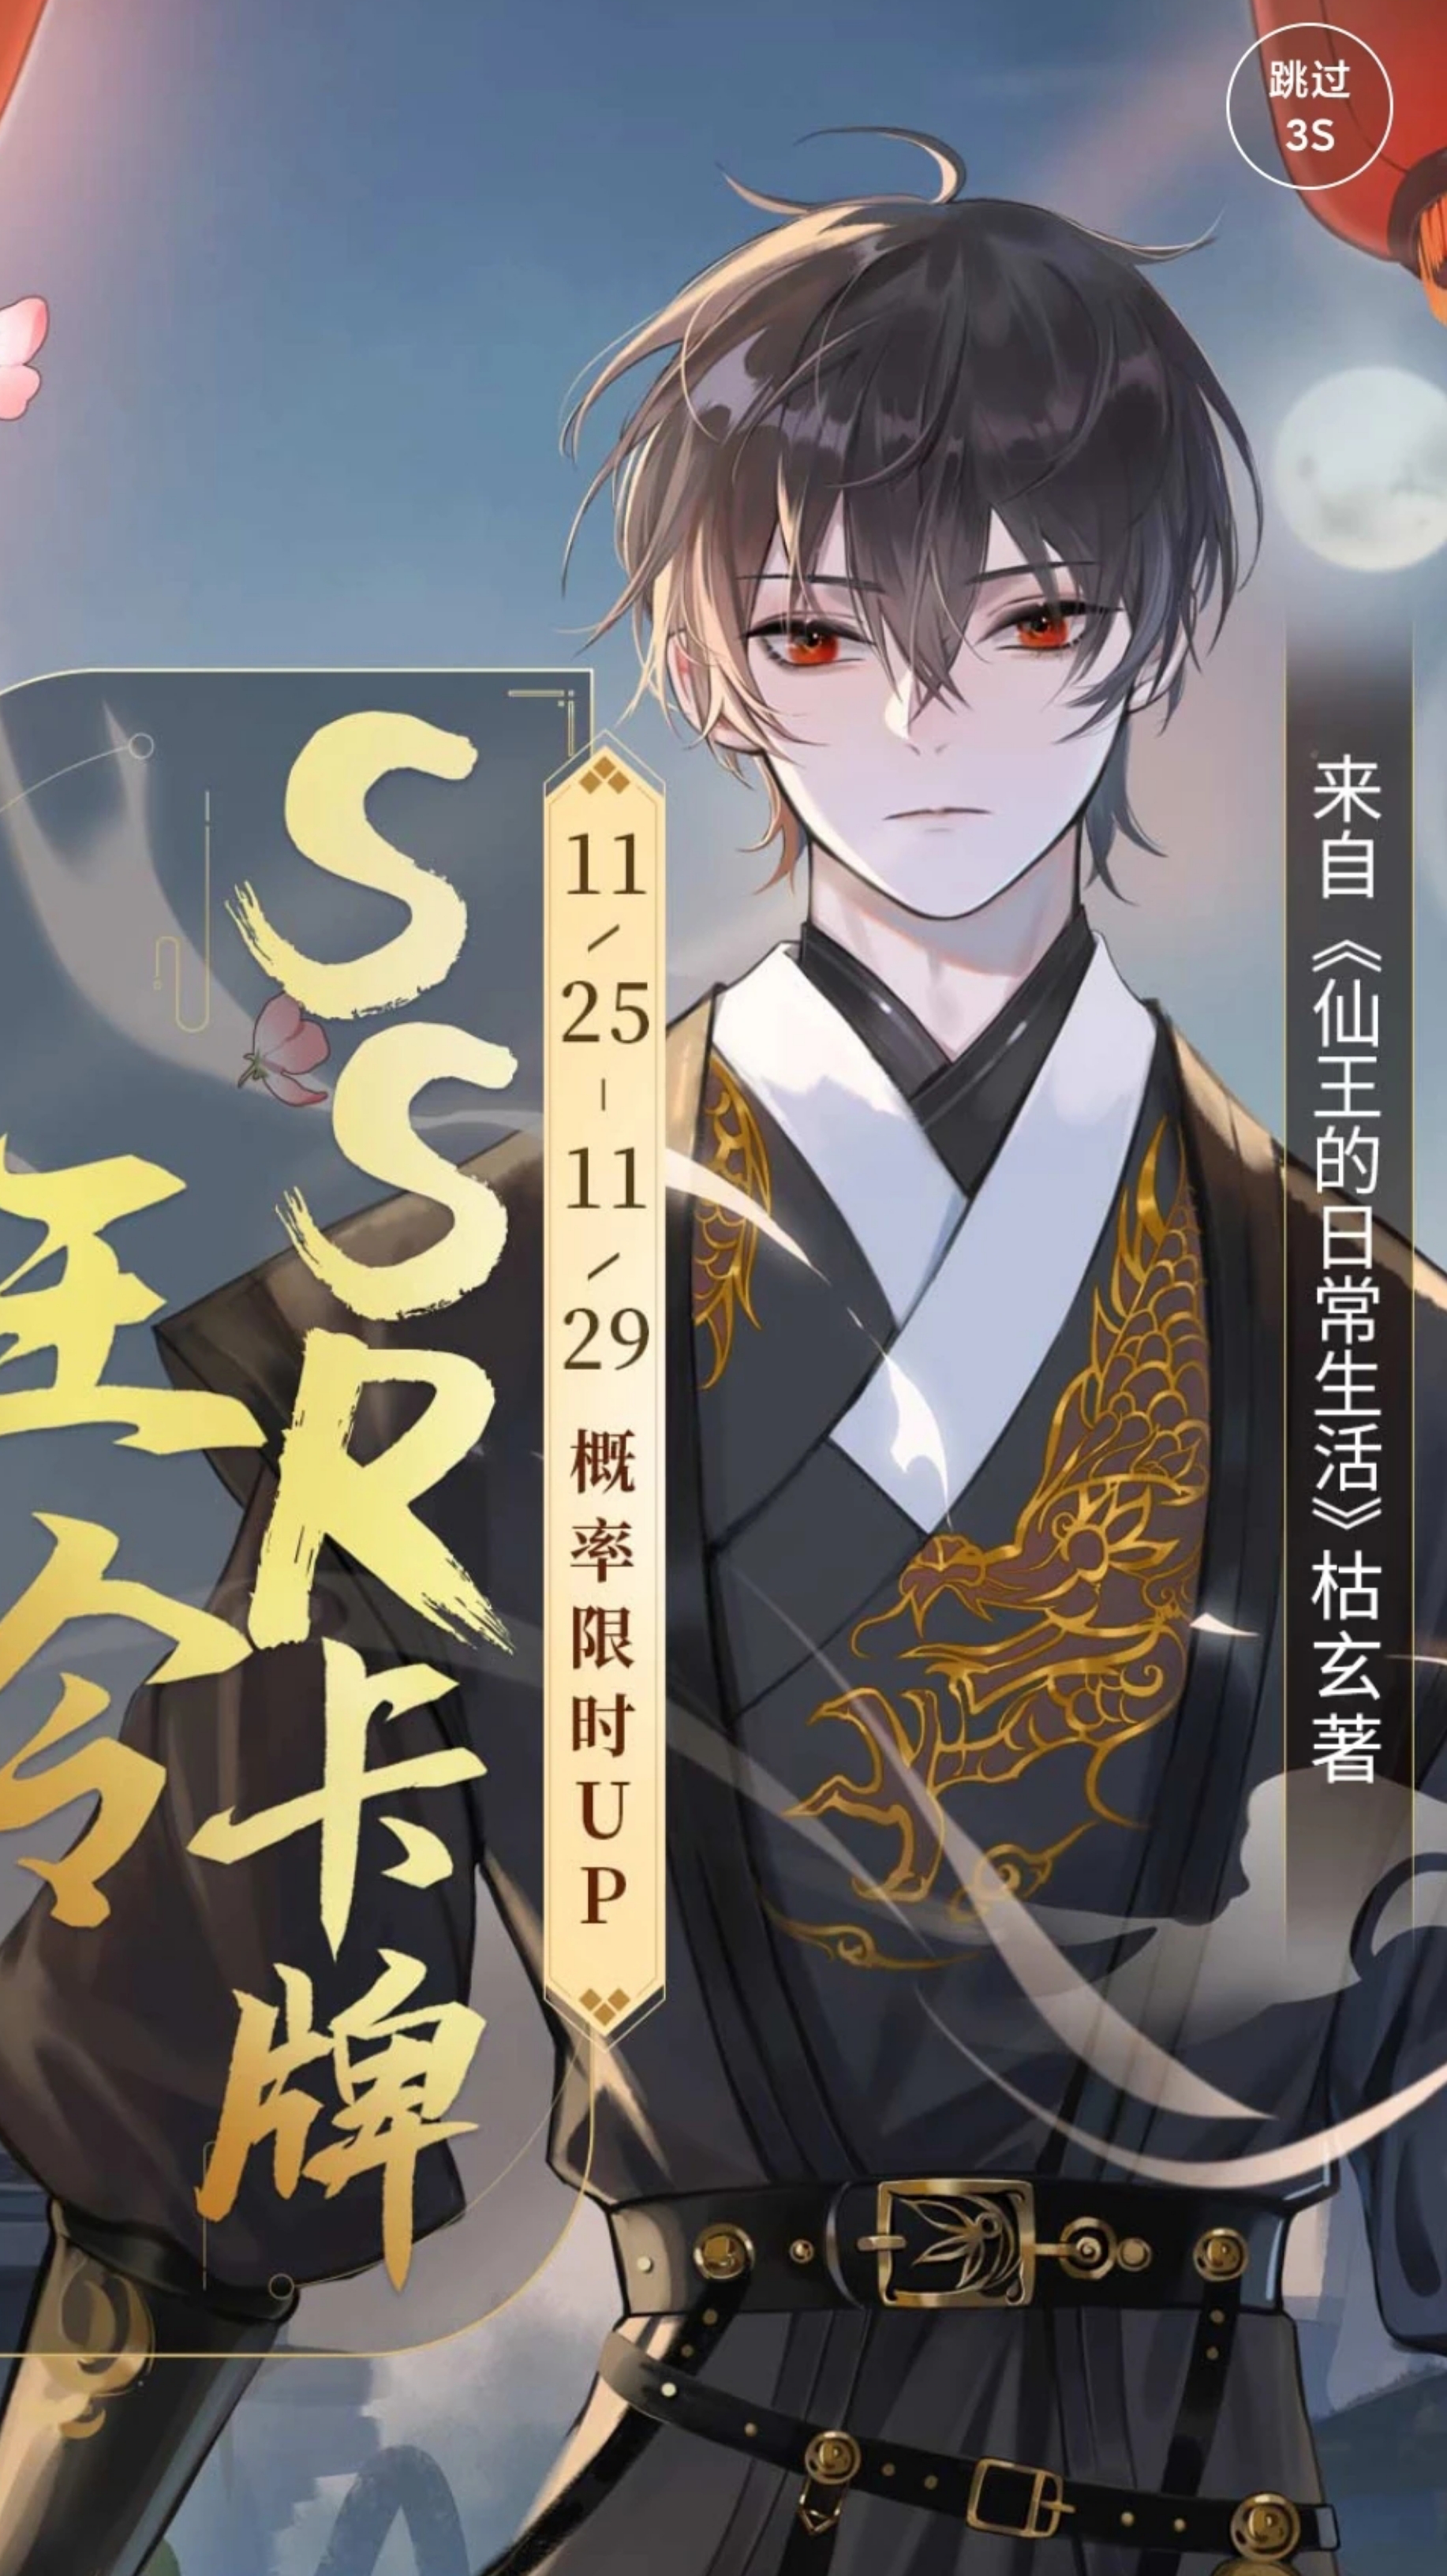 Read The Daily Life Of The Immortal King  Kuxuan  Webnovel